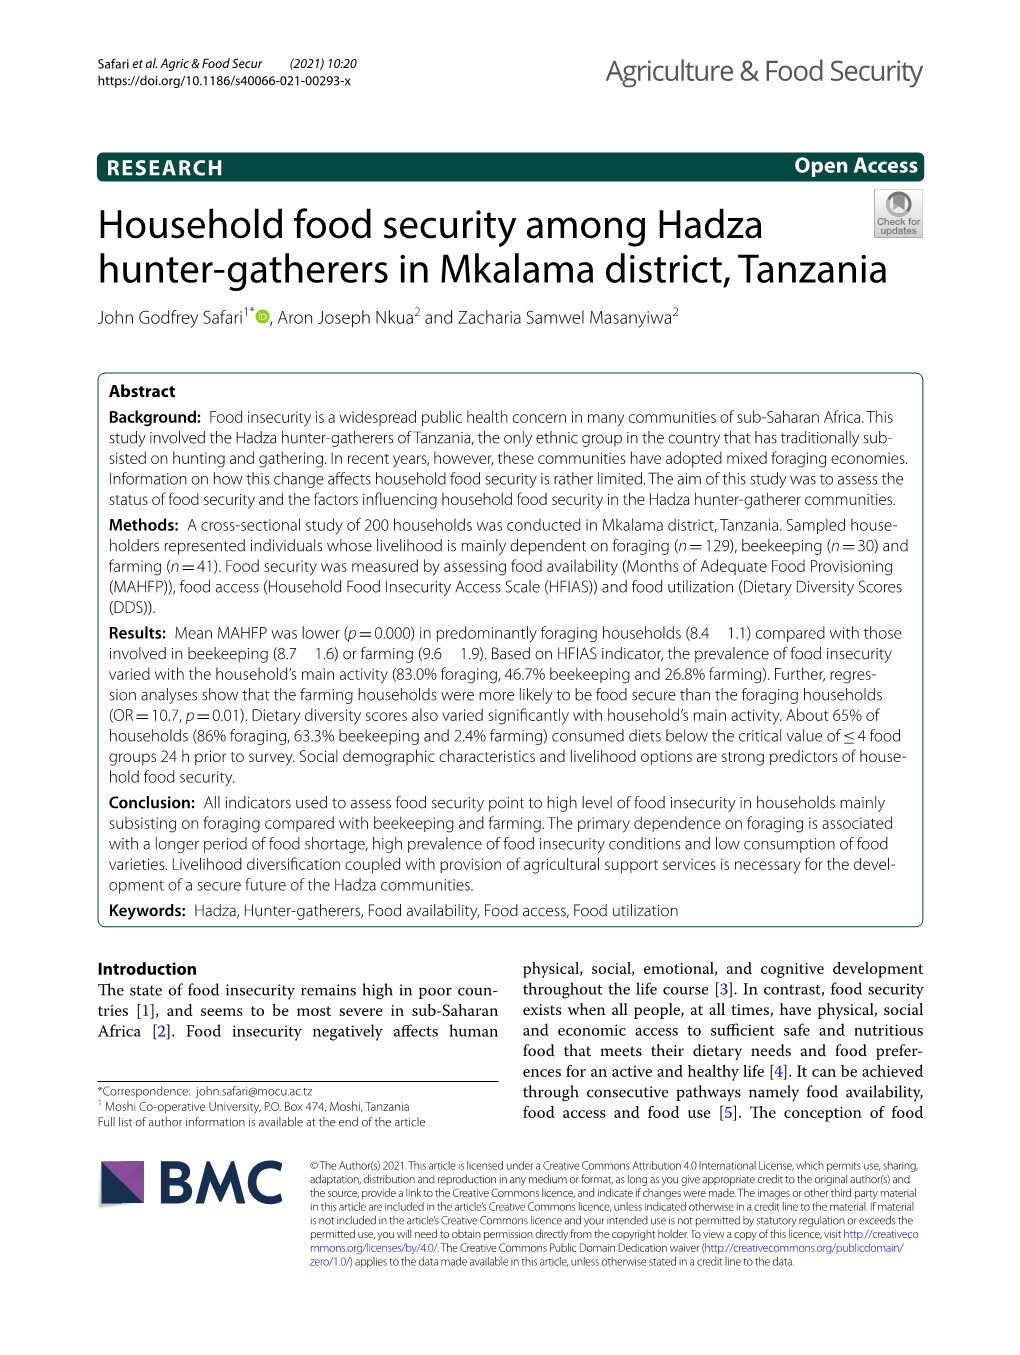 Household Food Security Among Hadza Hunter-Gatherers In